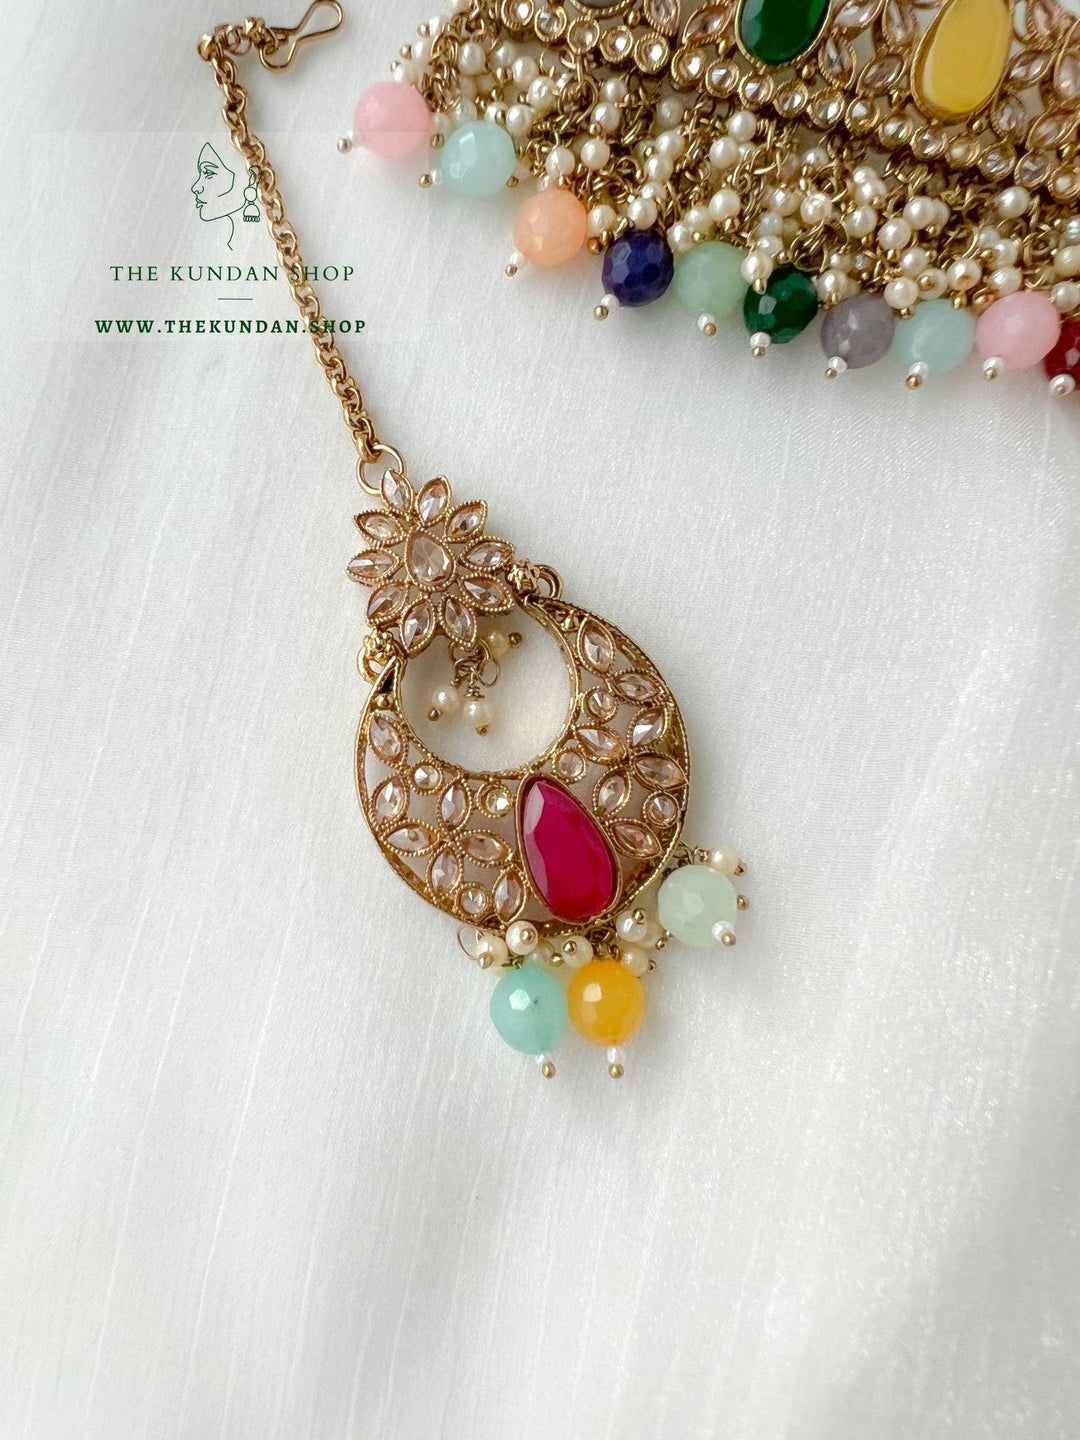 Oversight in Multi Necklace Sets THE KUNDAN SHOP 